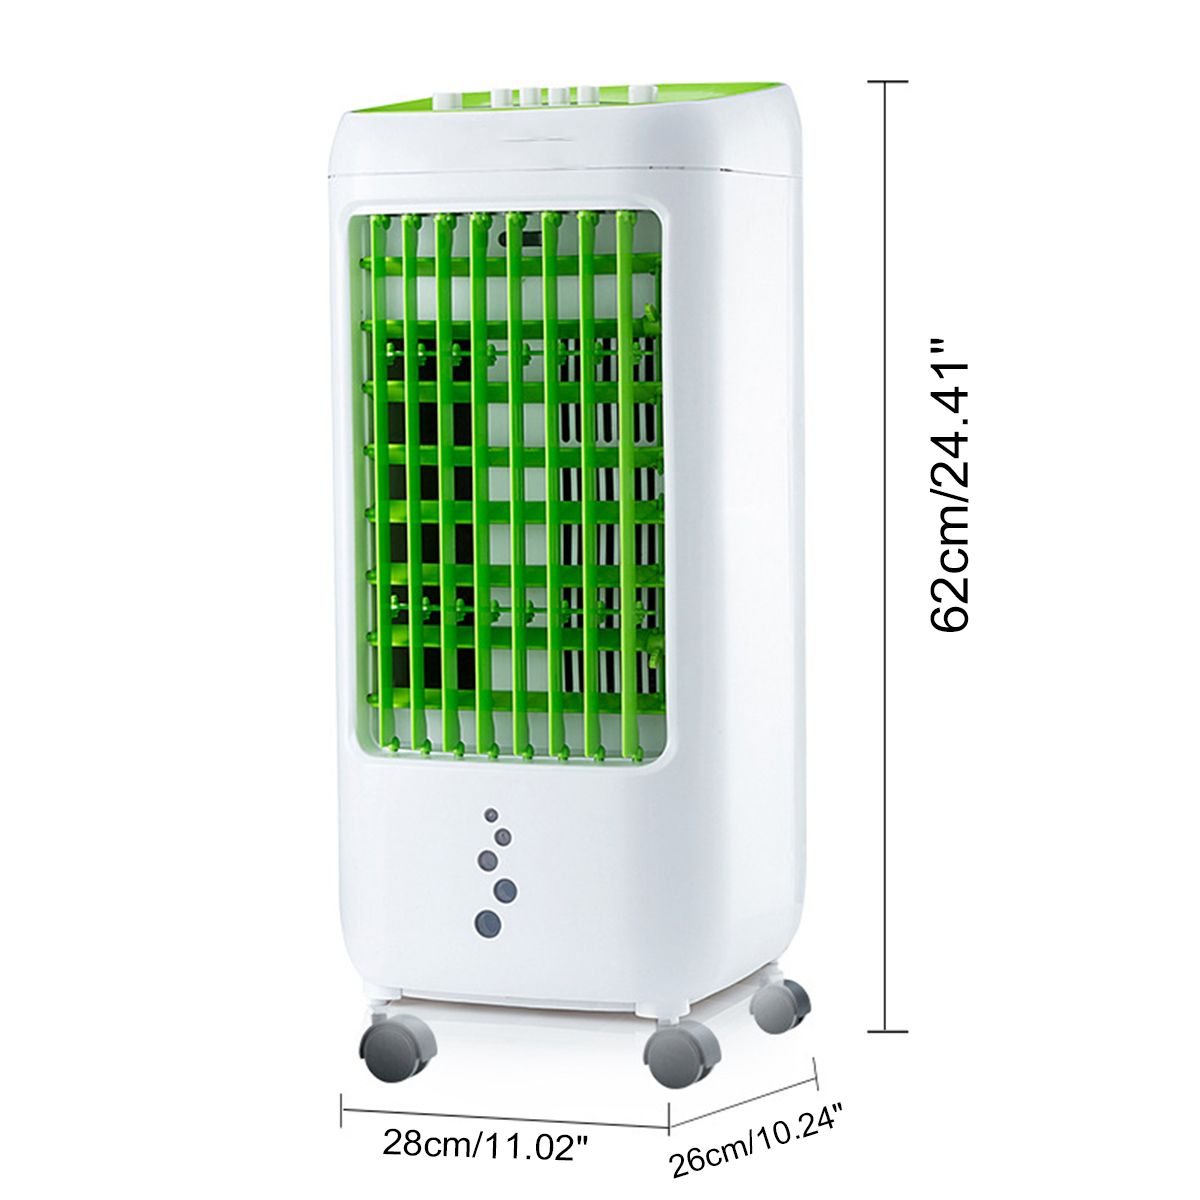 Air-Conditioner-Fan-Humidifier-Cooling-Bedroom-Portable-Cooler-Purification-1689642